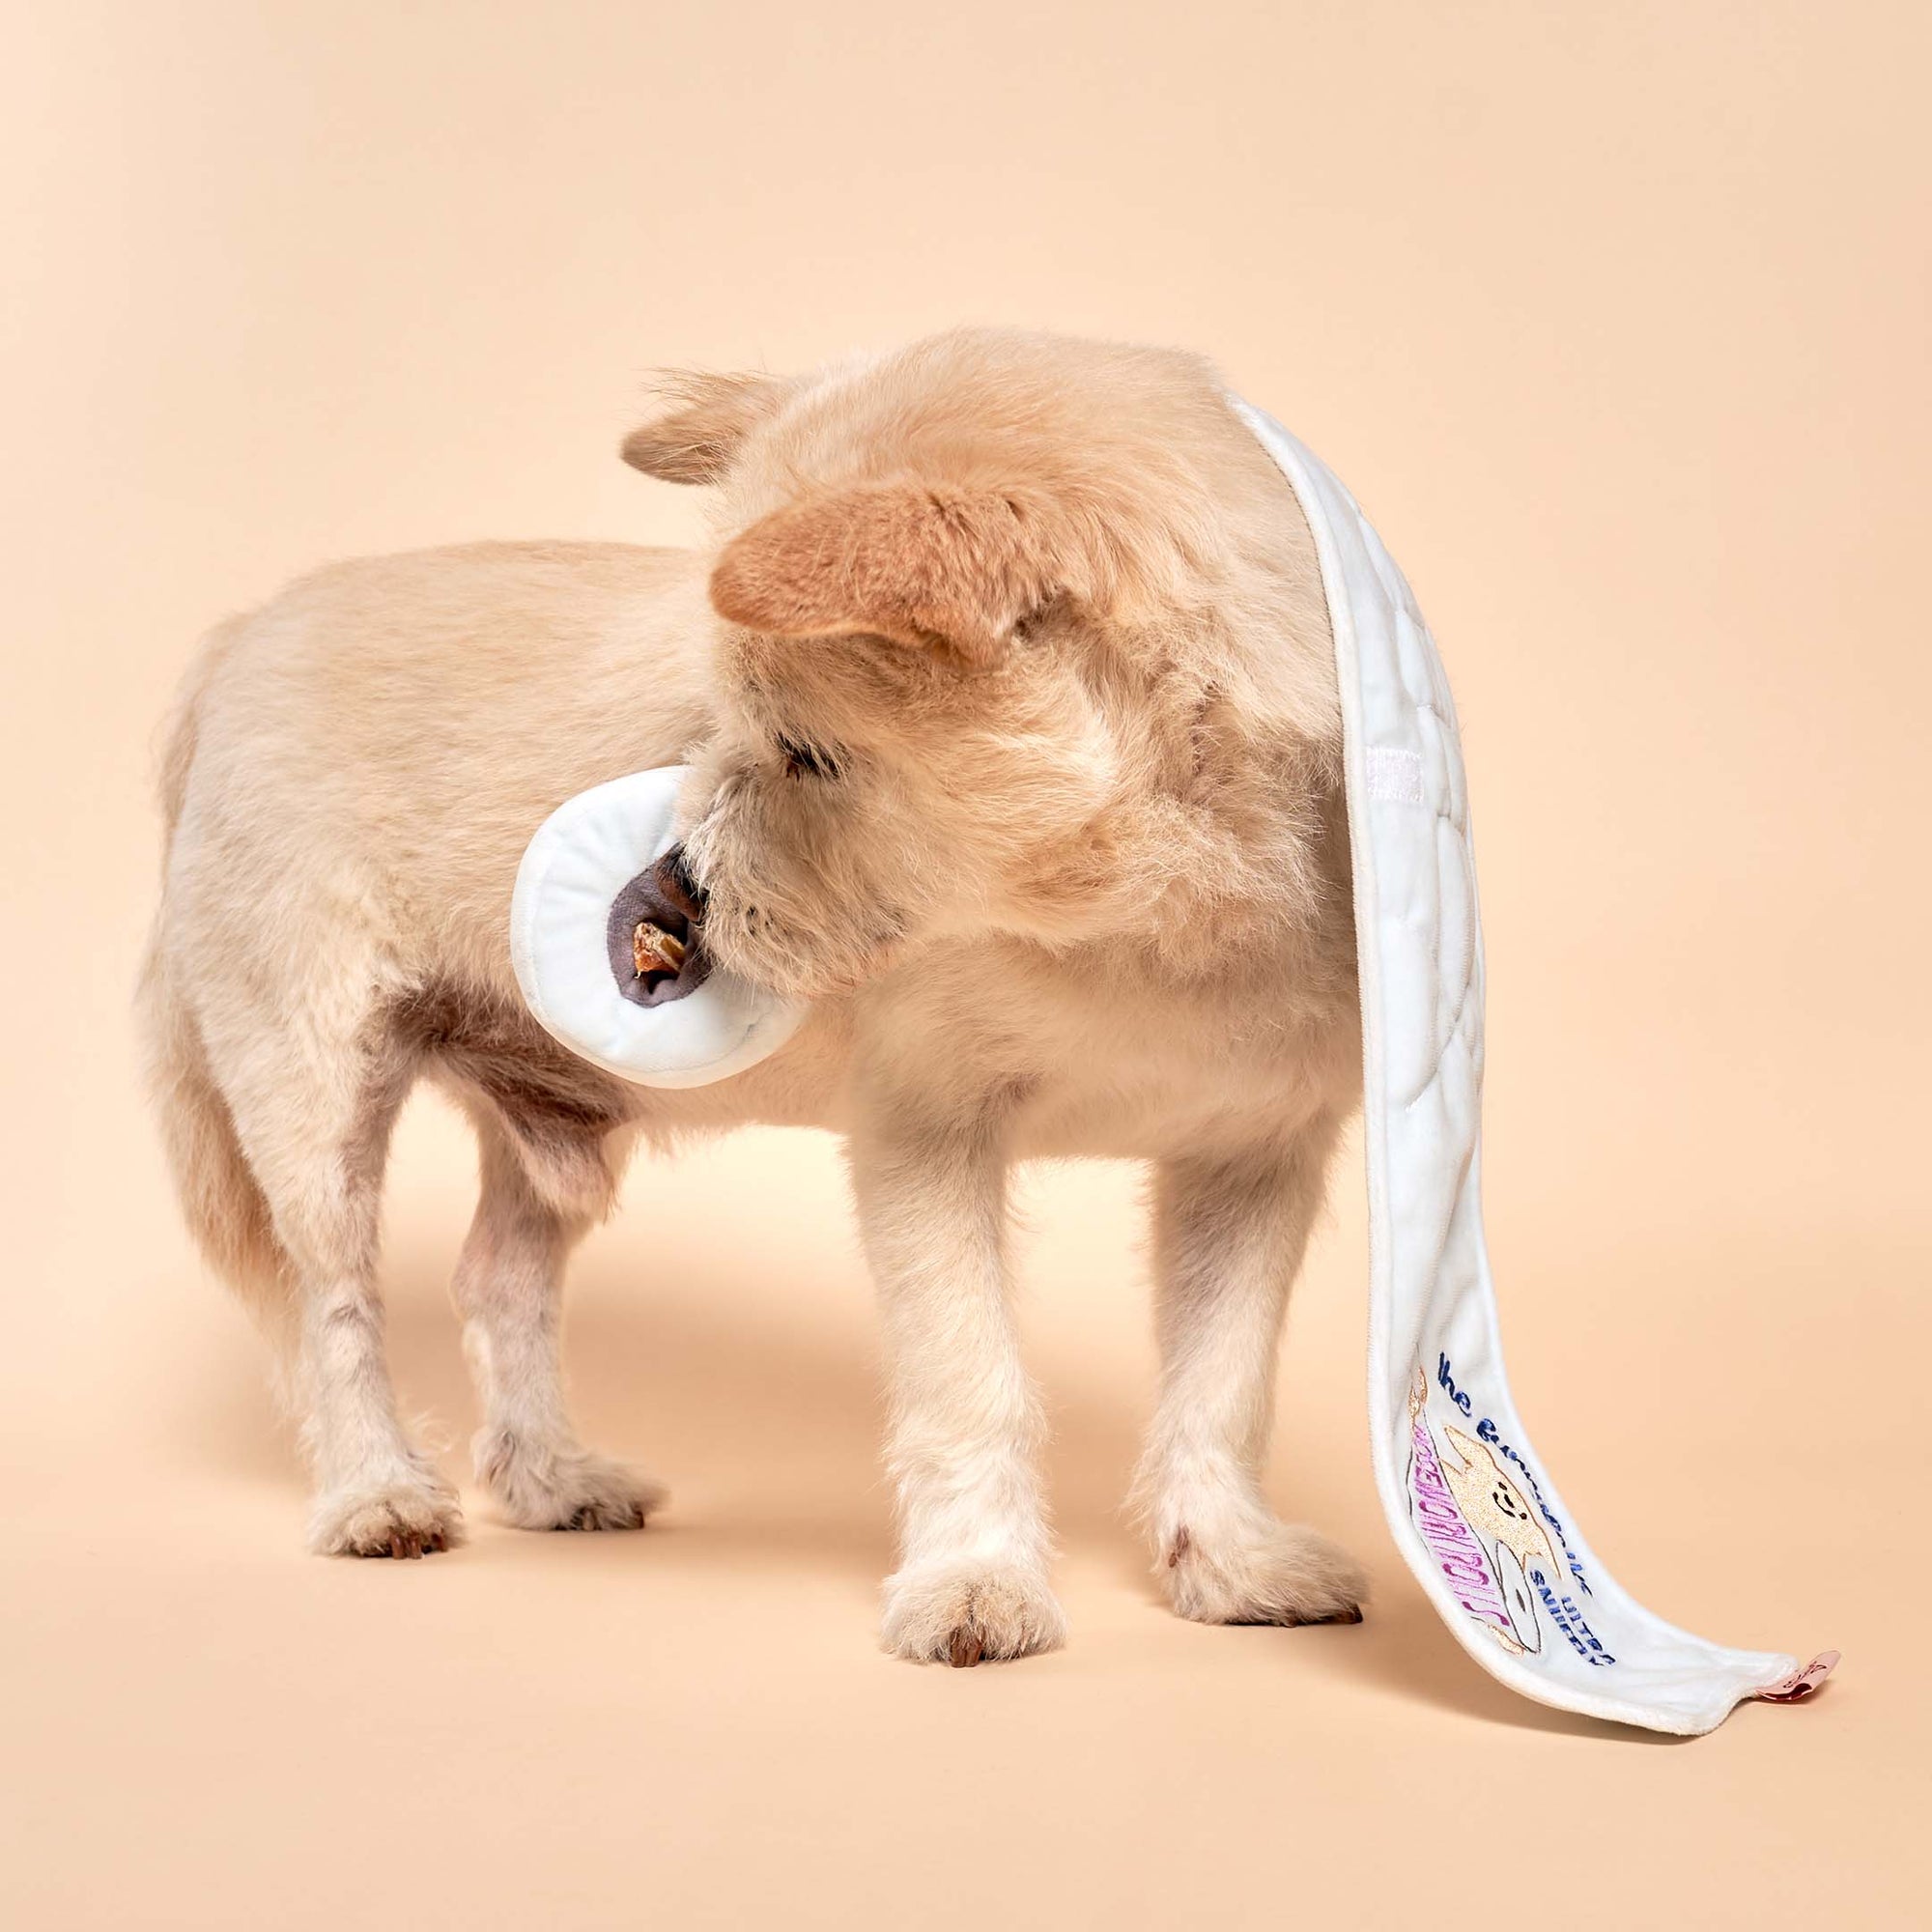 The photograph depicts a light-furred dog sniffing inside a white snuffle mat toy with "The Furryfolks" branding visible. The toy is designed with compartments for hiding treats, providing the dog with a playful challenge. The mat is laid out on a beige background, emphasizing the interaction between the dog and the toy.